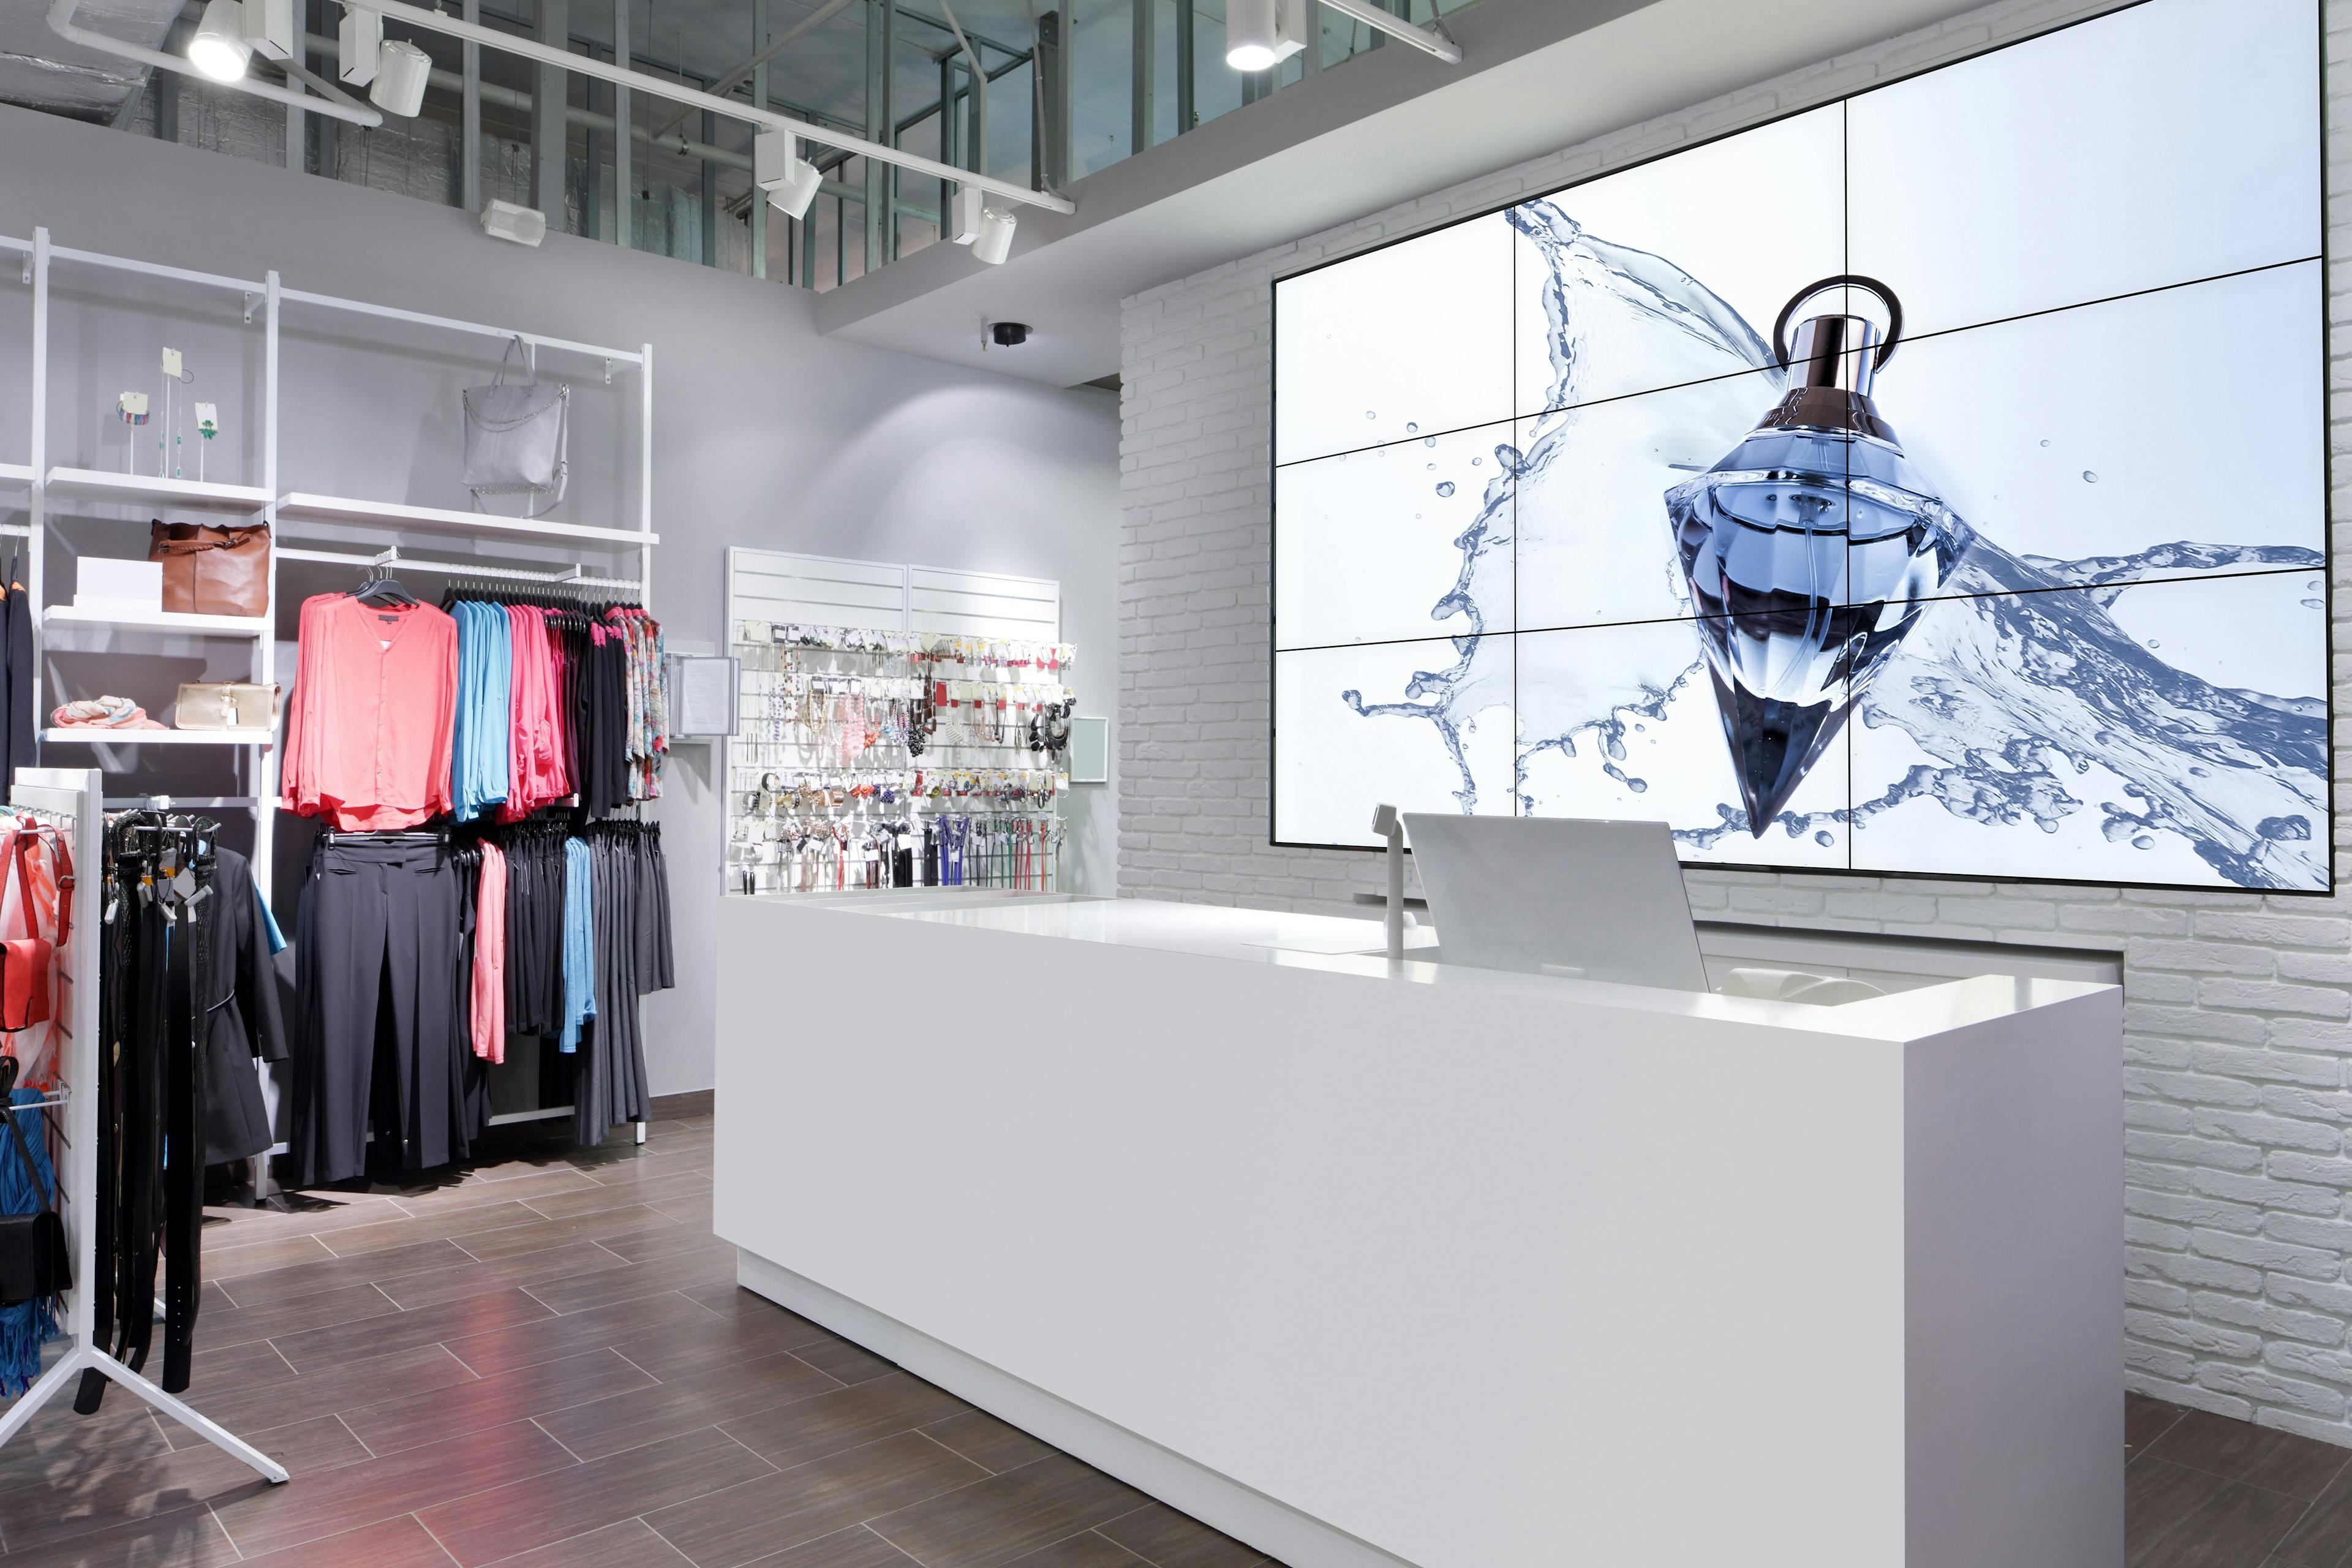 Video wall installation in a retail setting